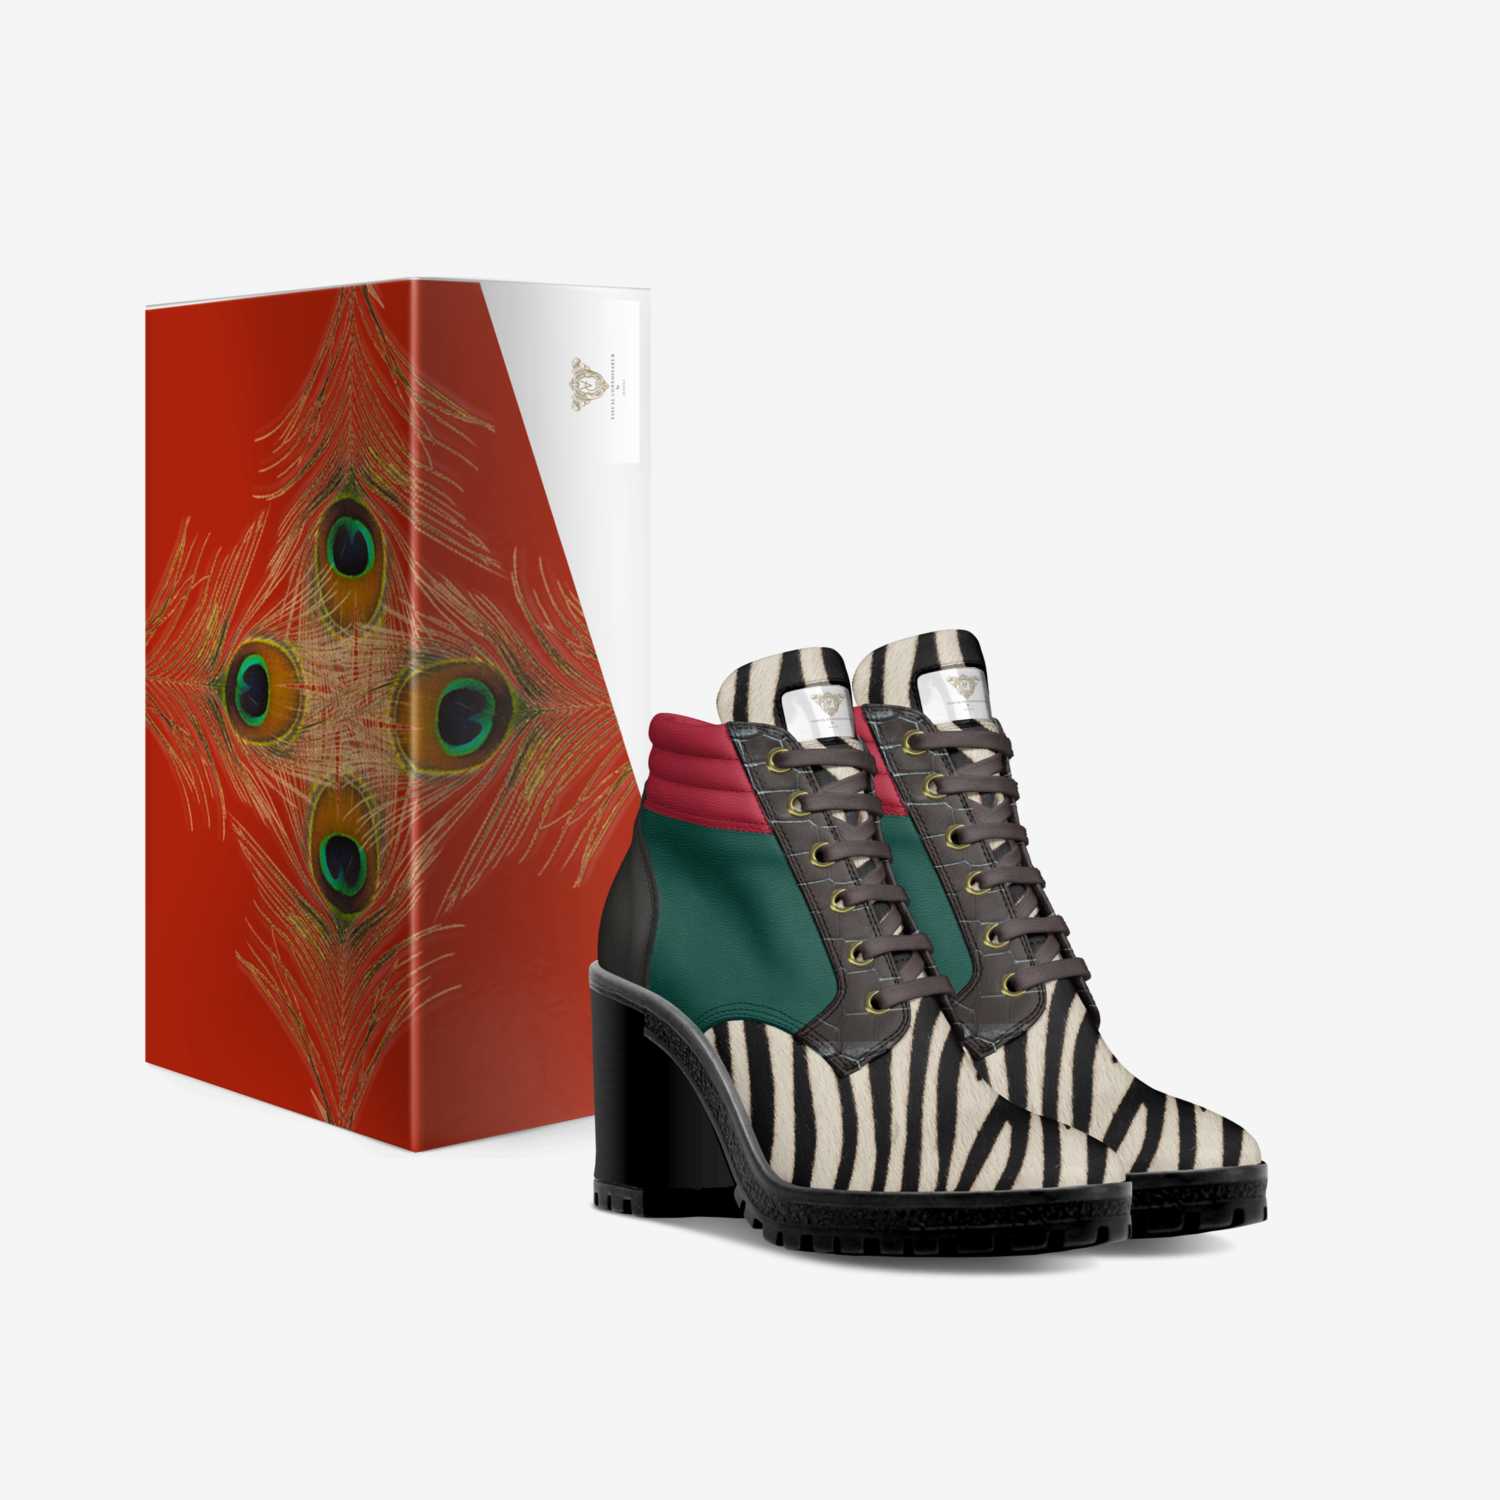 Assata custom made in Italy shoes by Justin Johnson | Box view